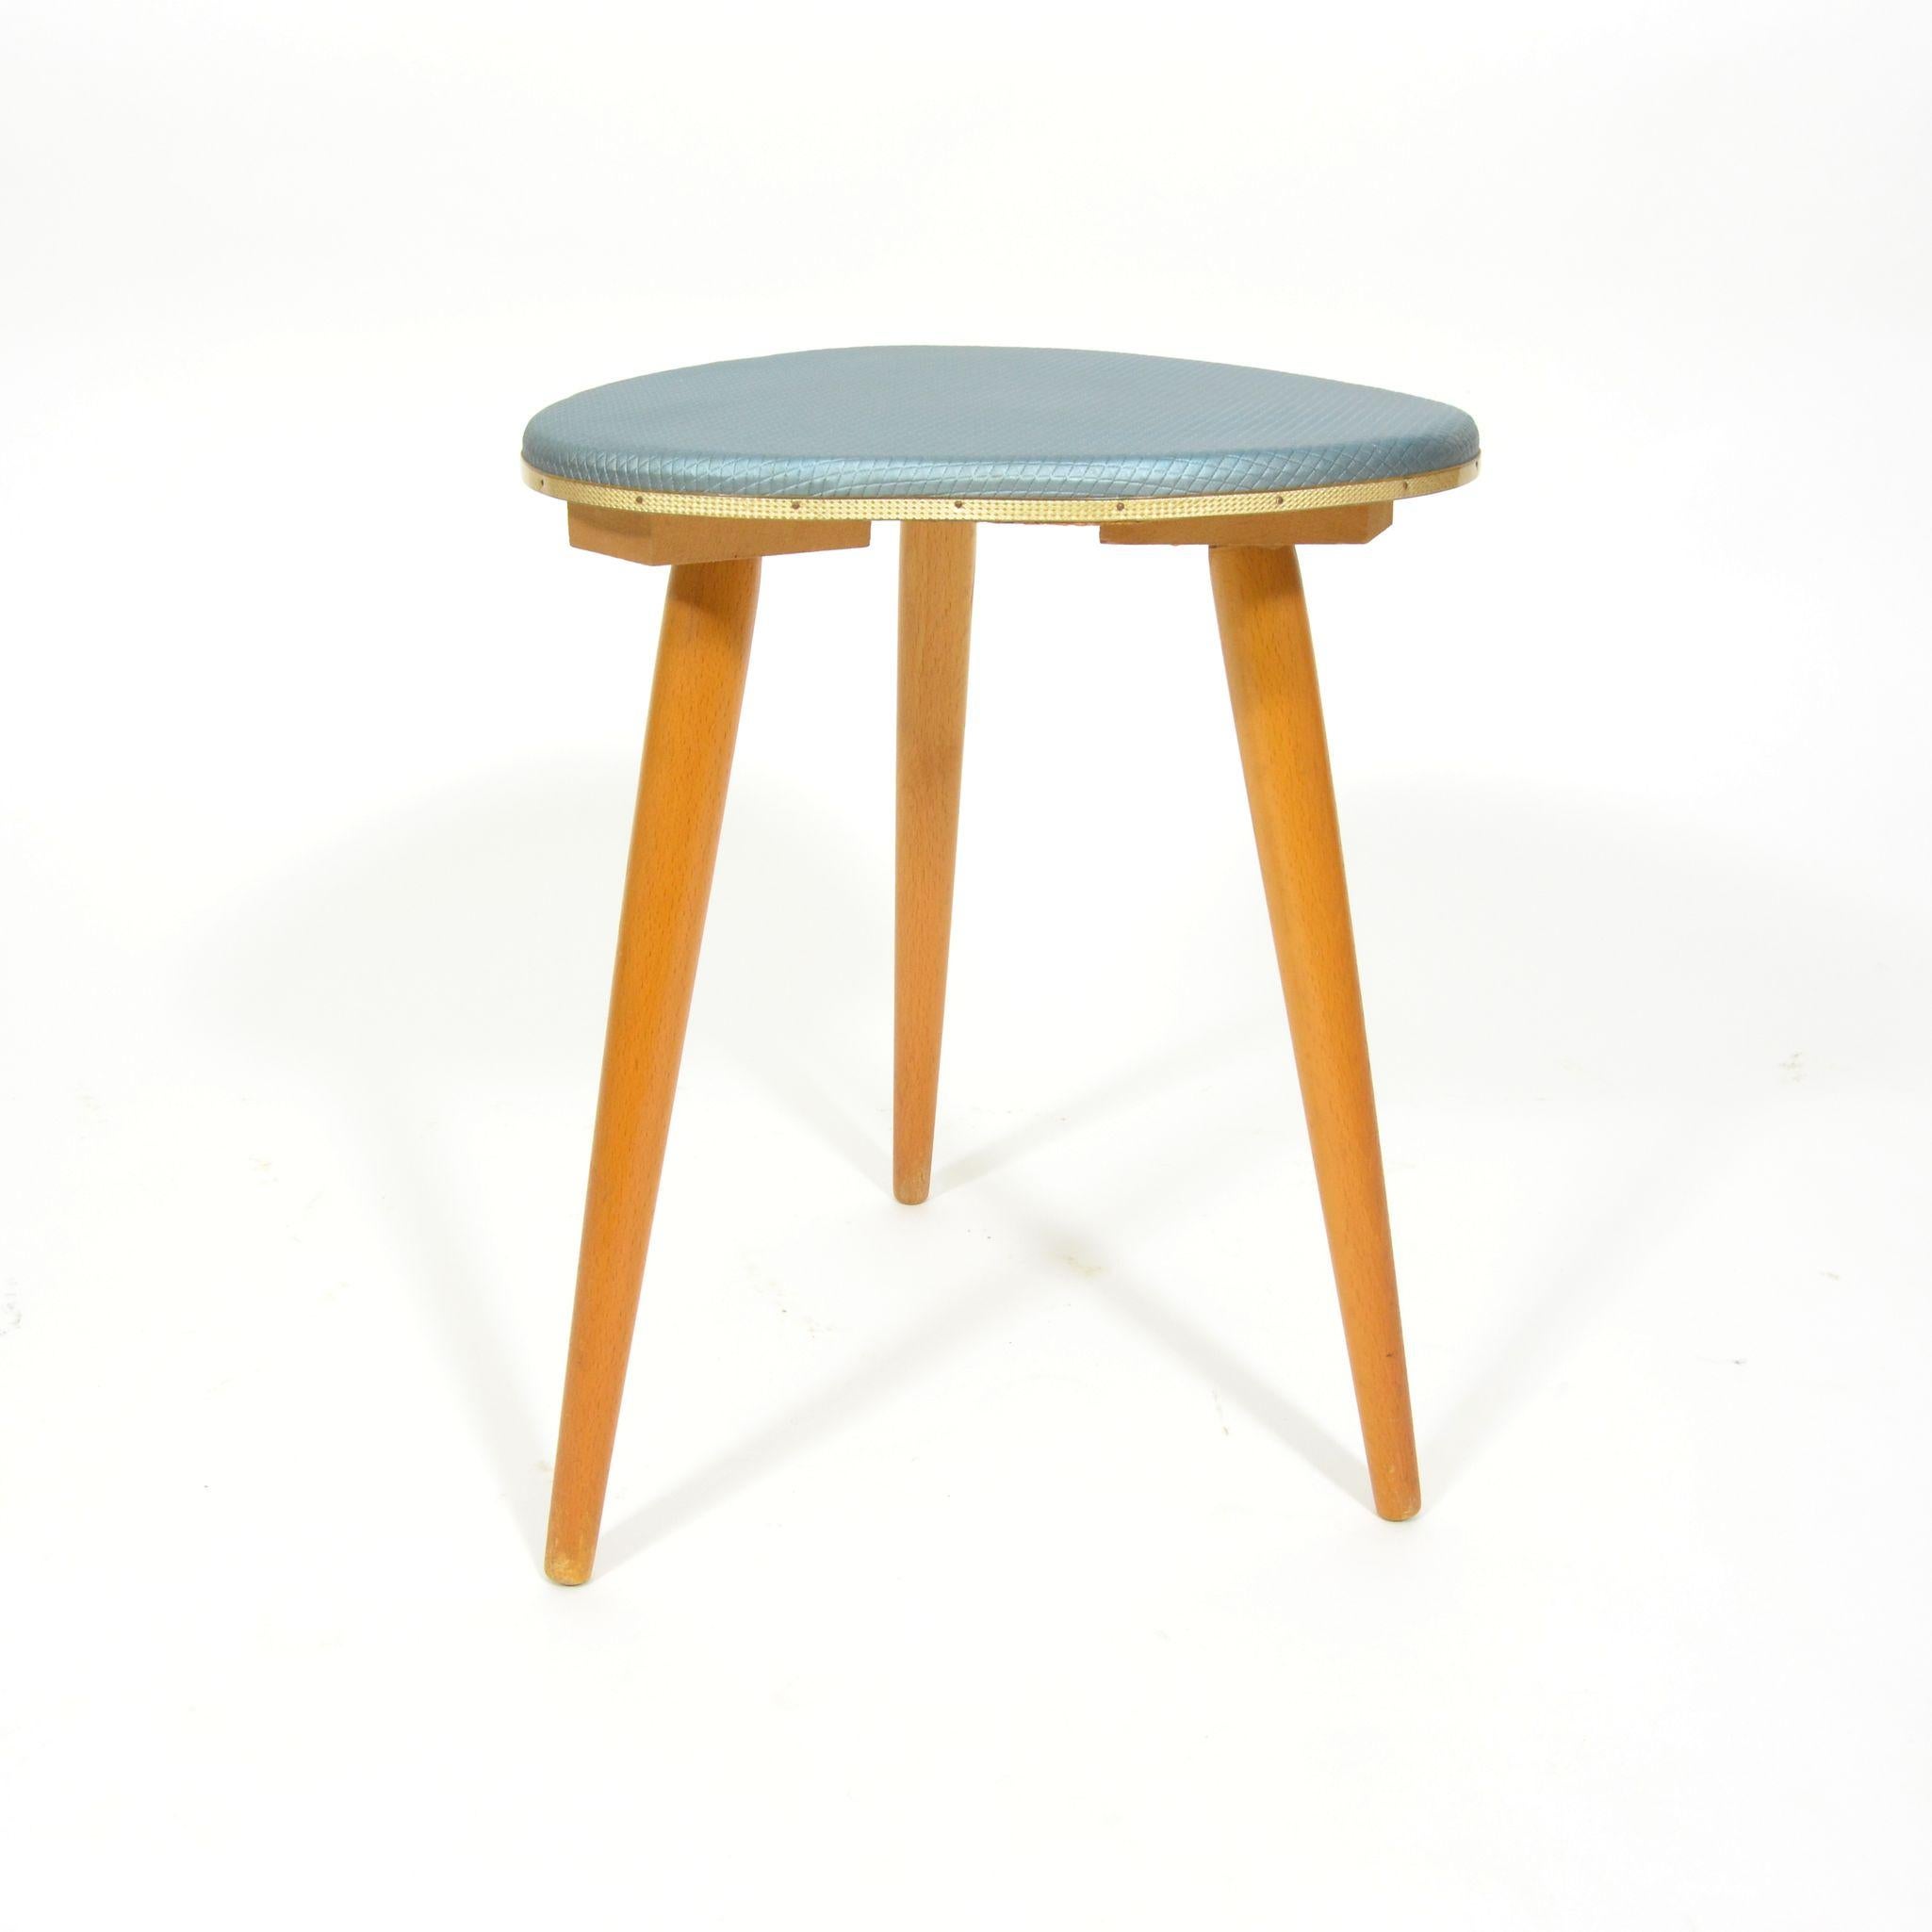 Vintage Tripod Stool from 1960s In Good Condition For Sale In Zbiroh, CZ